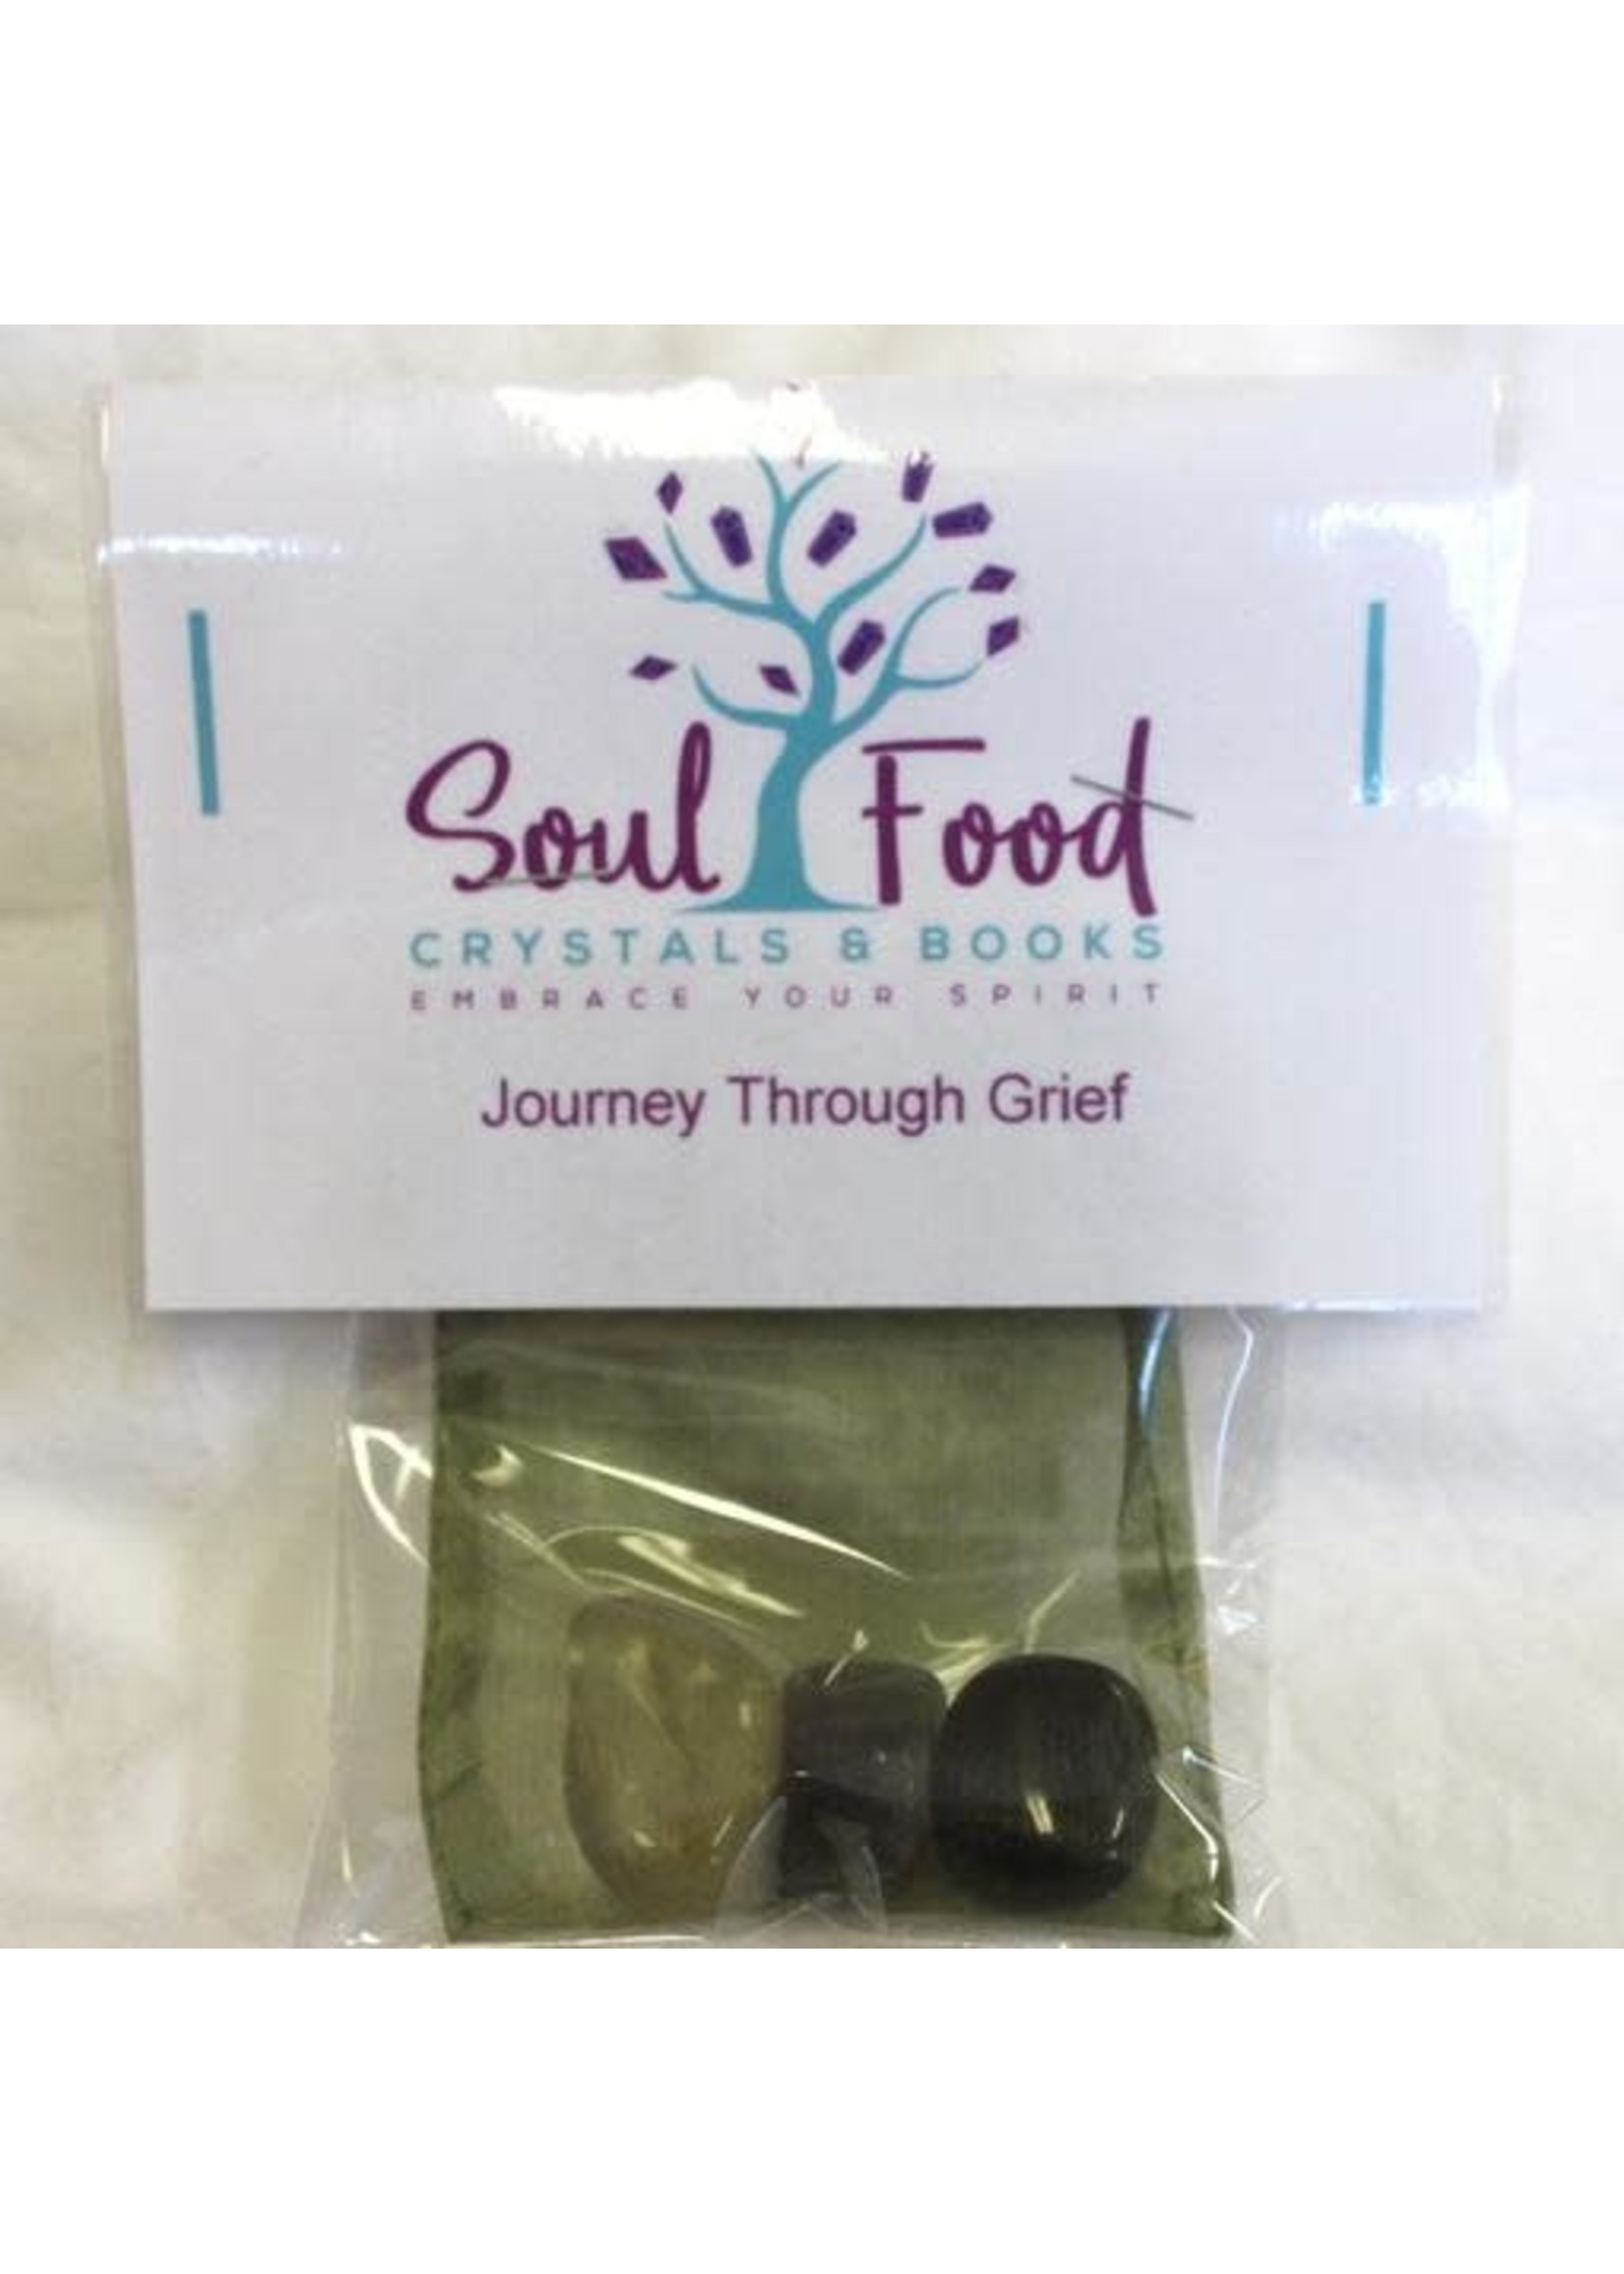 Journey Through Grief Crystal Kits